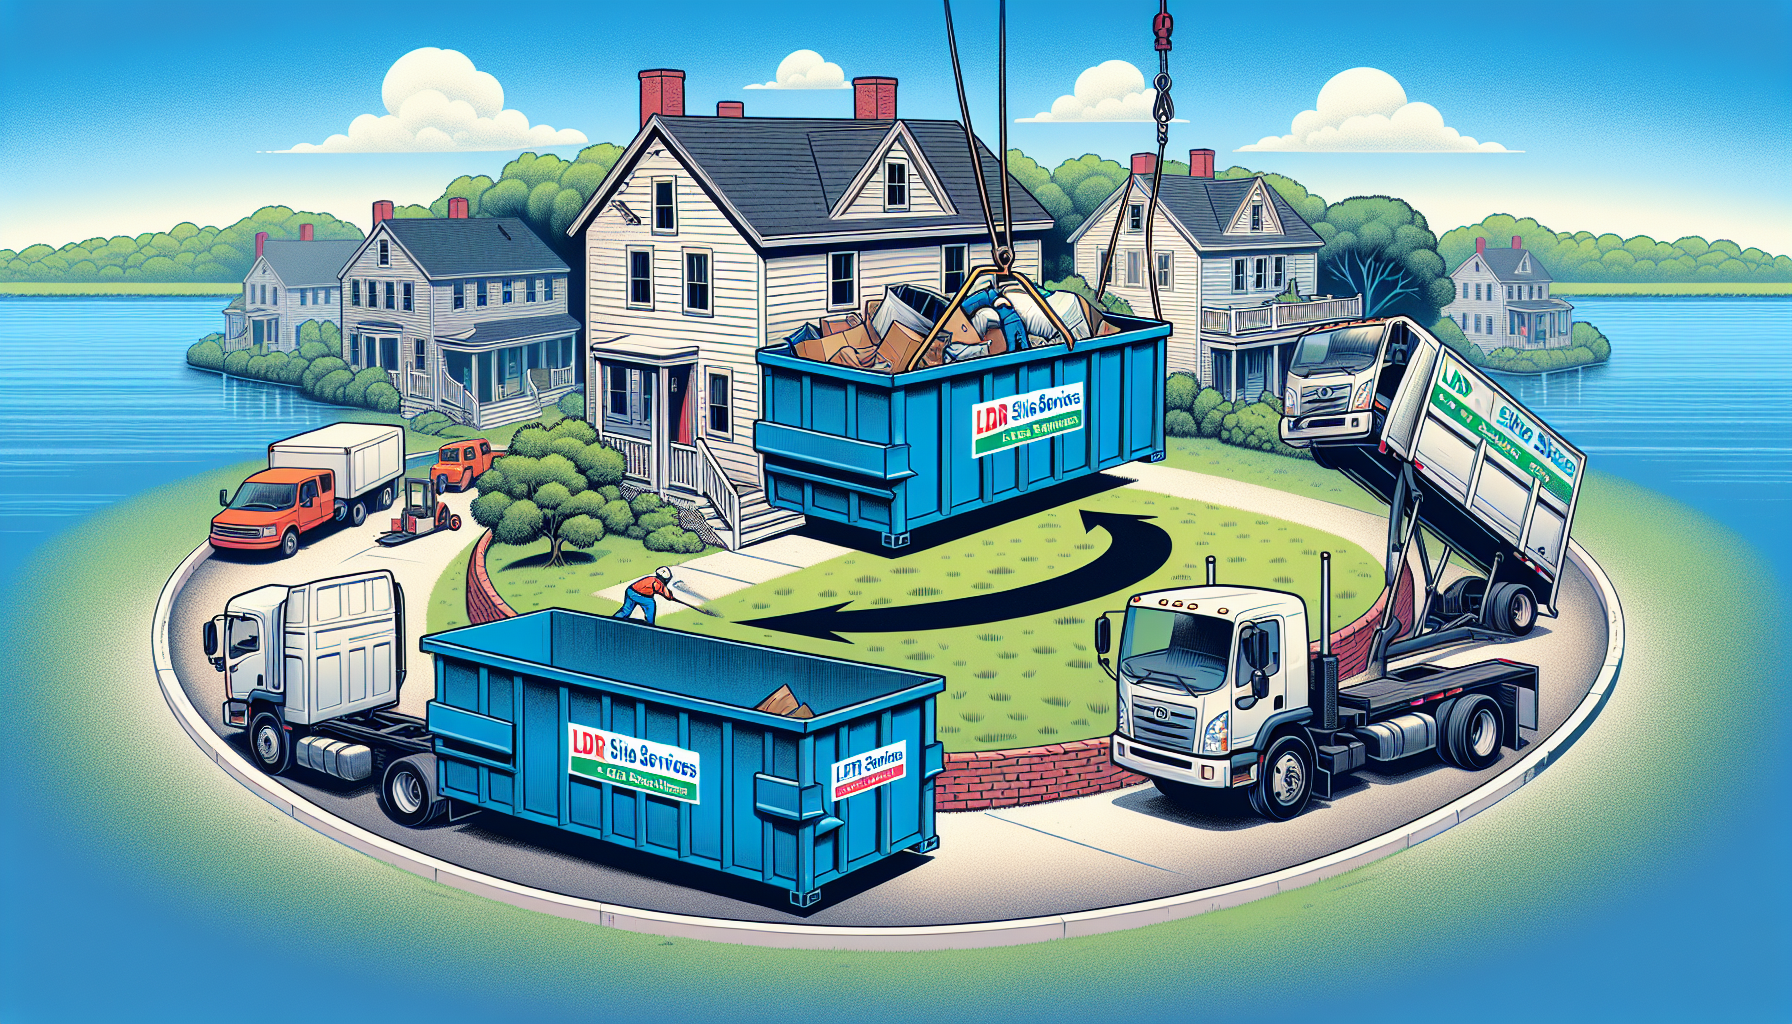 Dumpster rental from LDR Site Services in Rhode Island